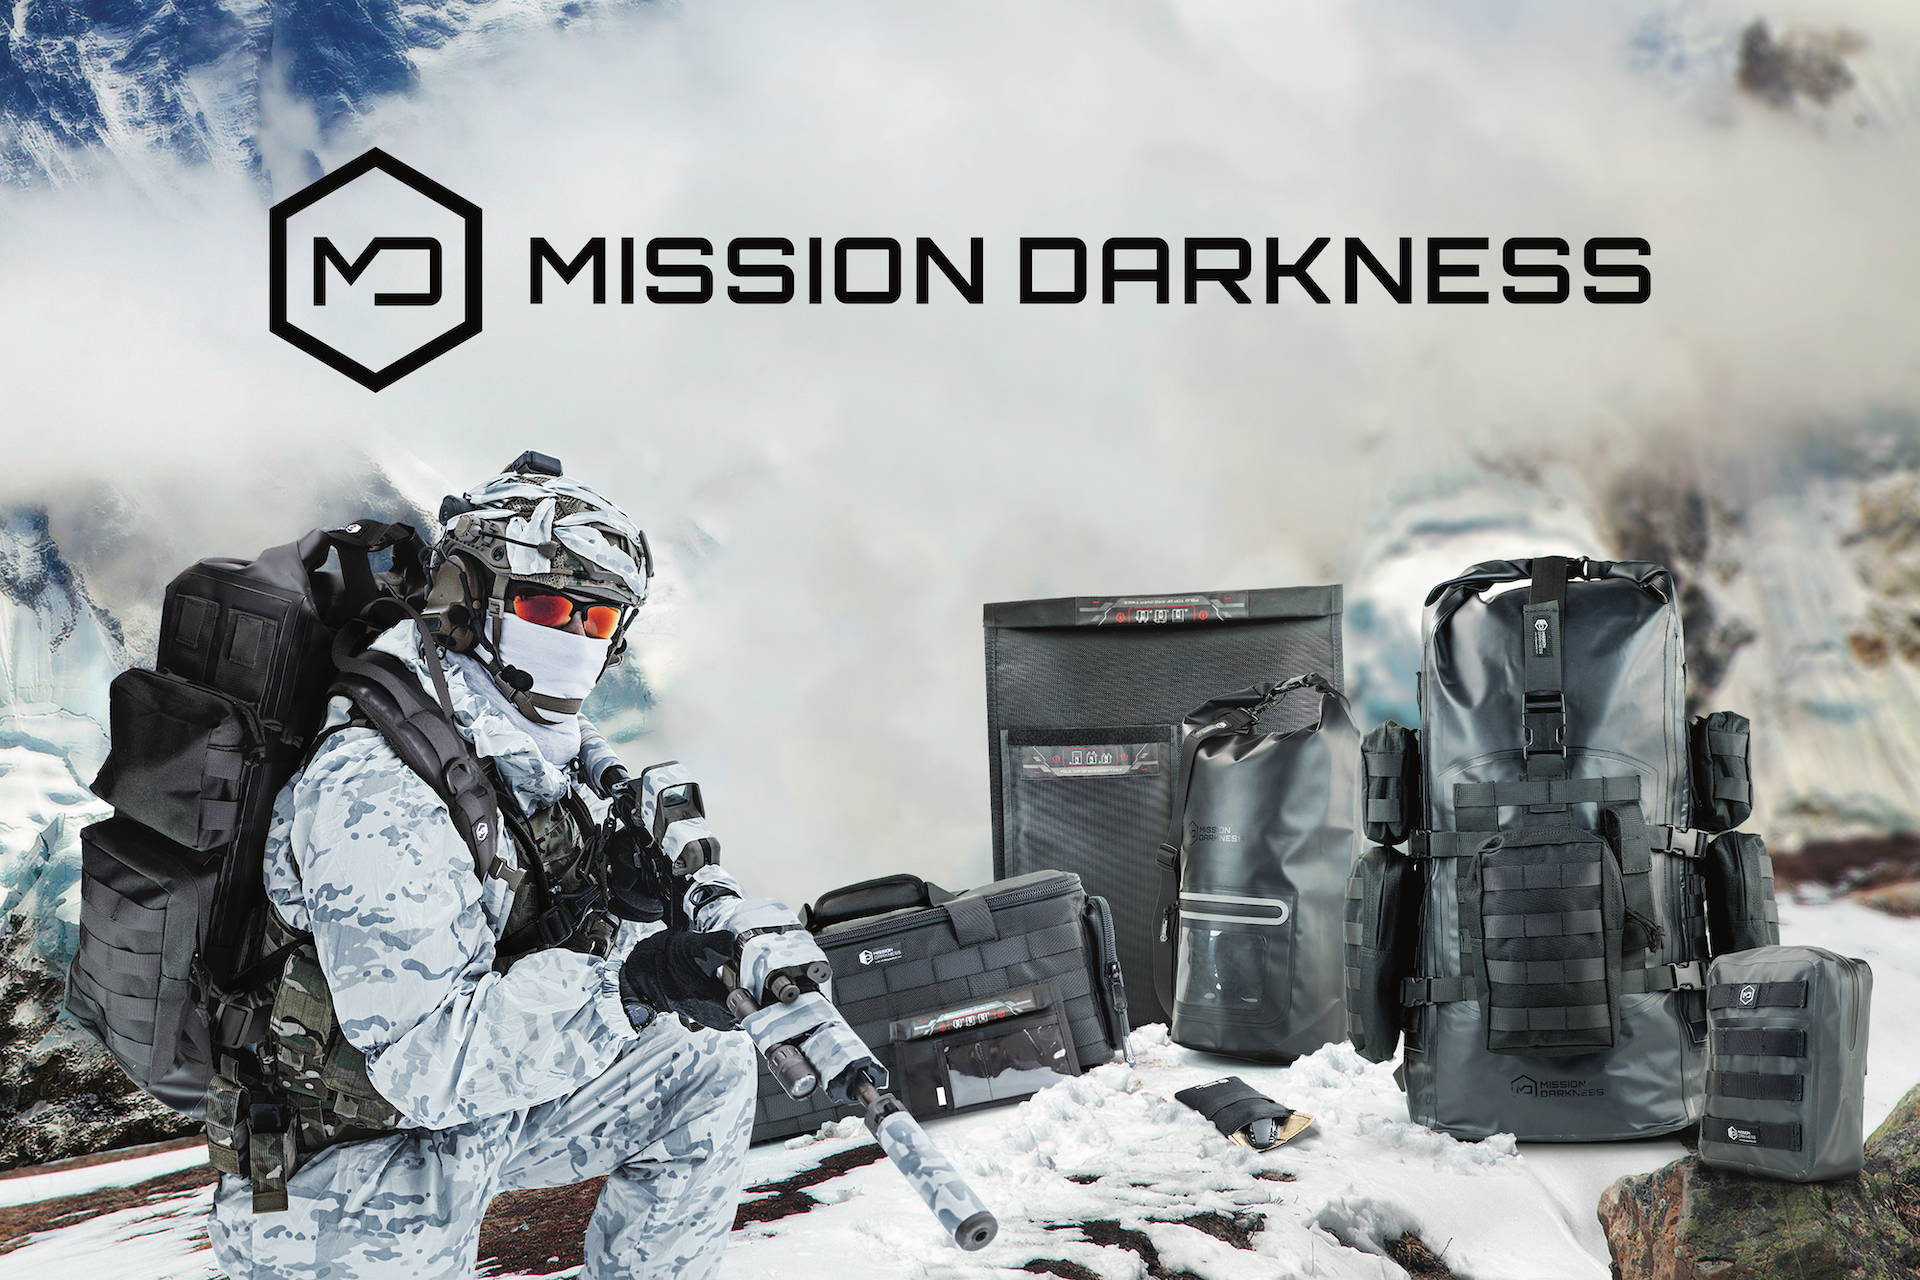 Mission Darkness faraday bags and analysis enclosures made by MOS Equipment